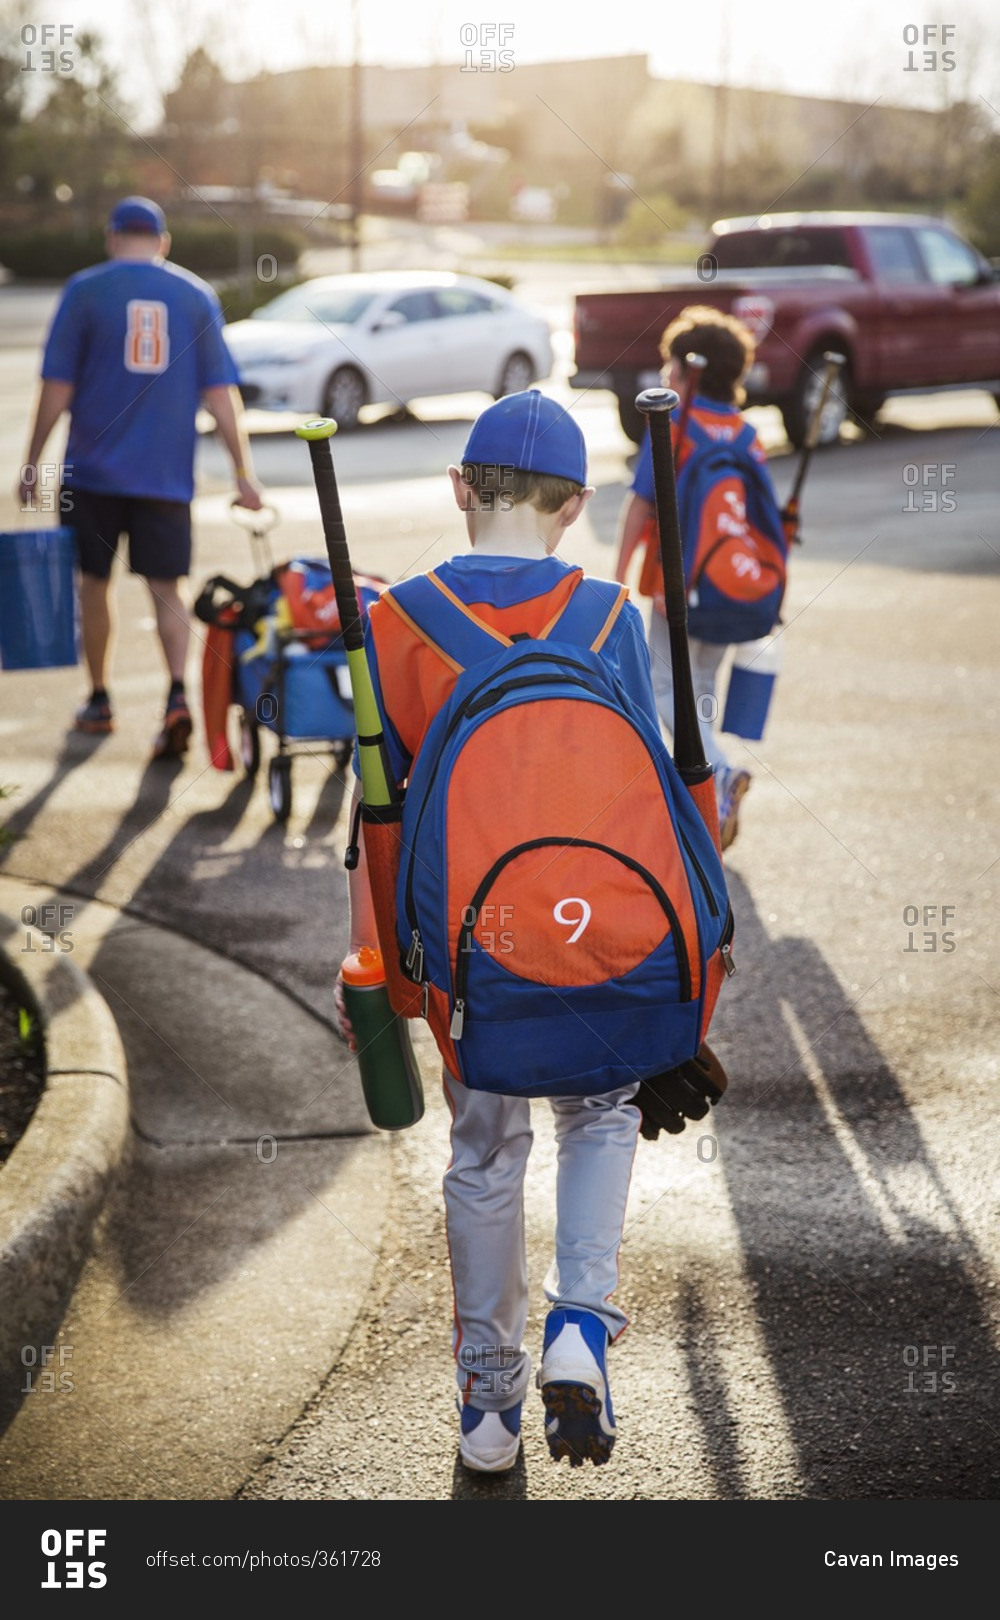 Rear view of boys and baseball coach walking on street